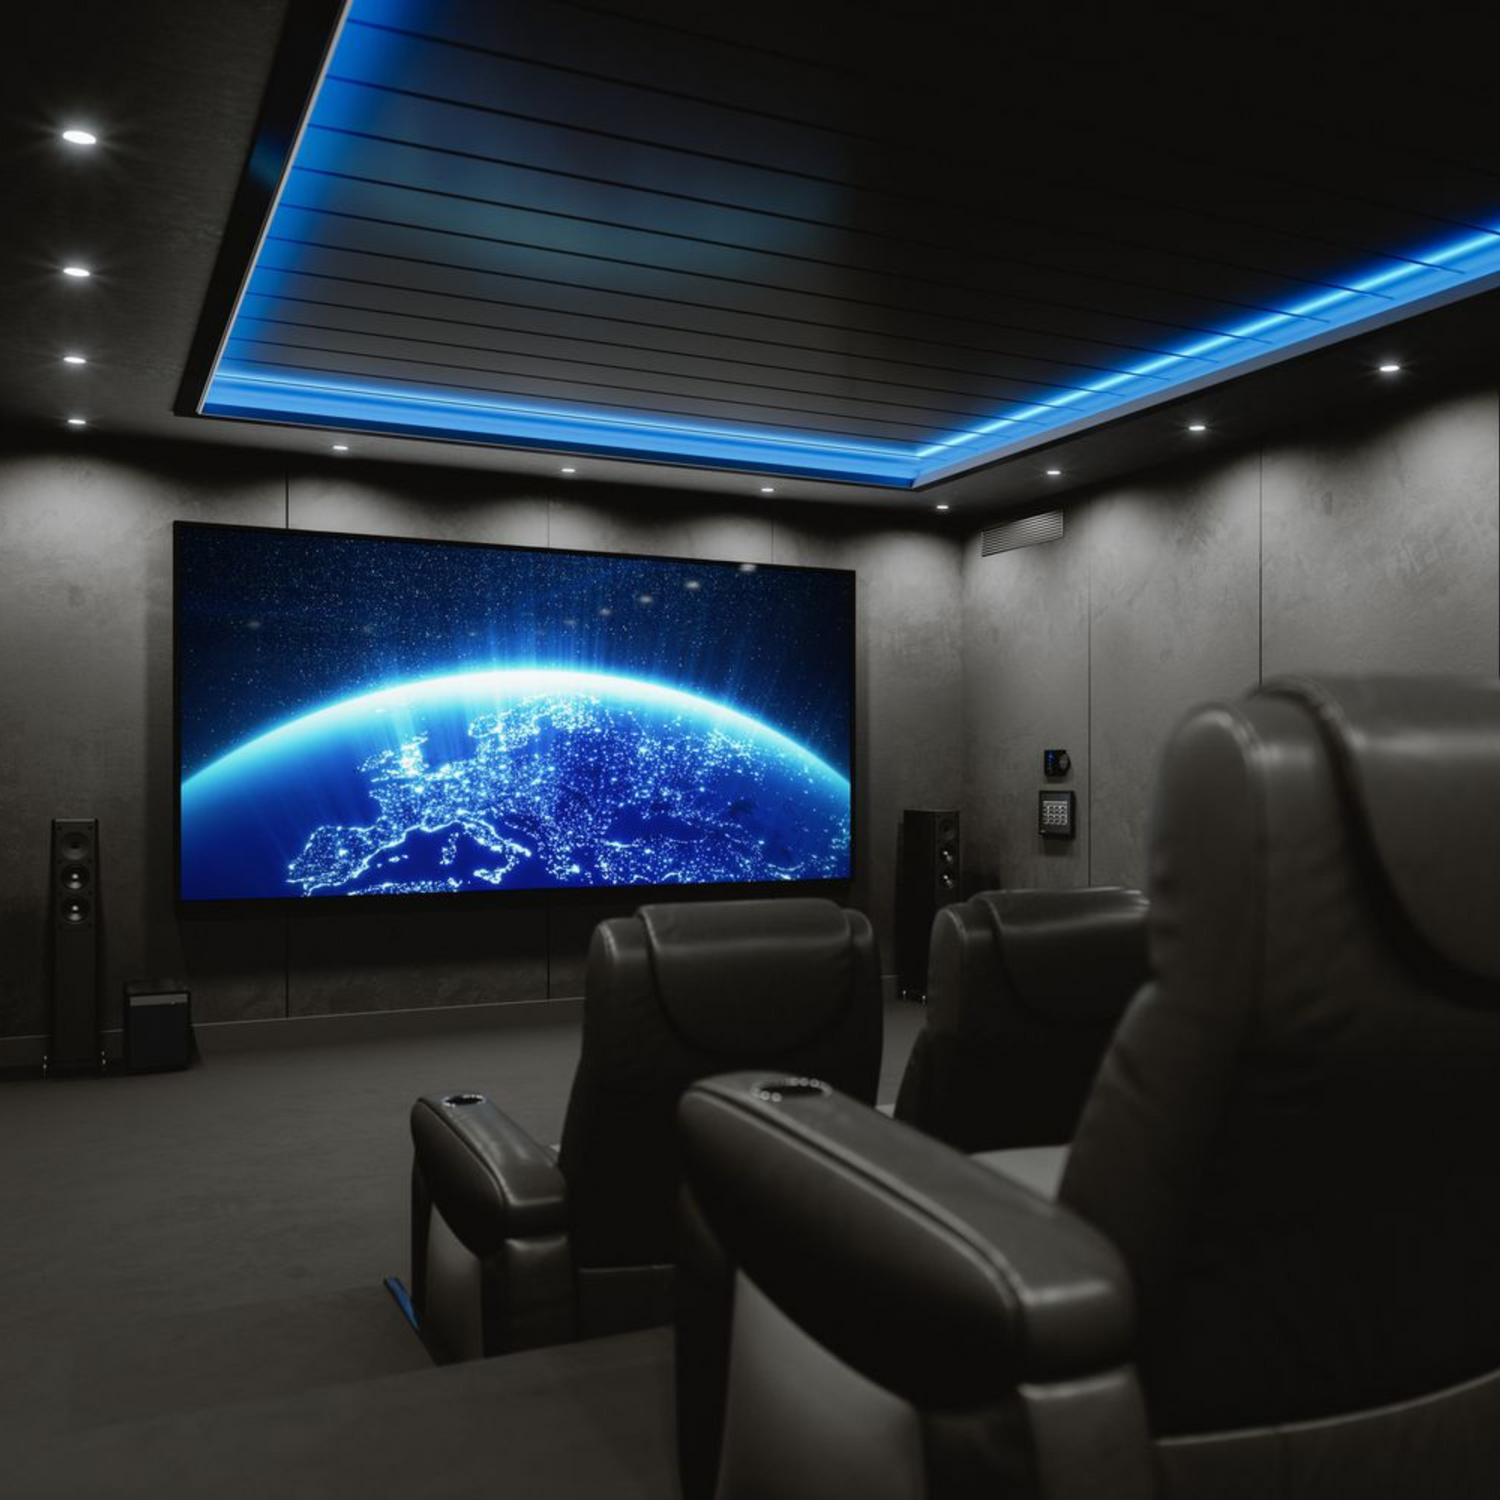 Essential Information for Choosing a Home Theatre Projector